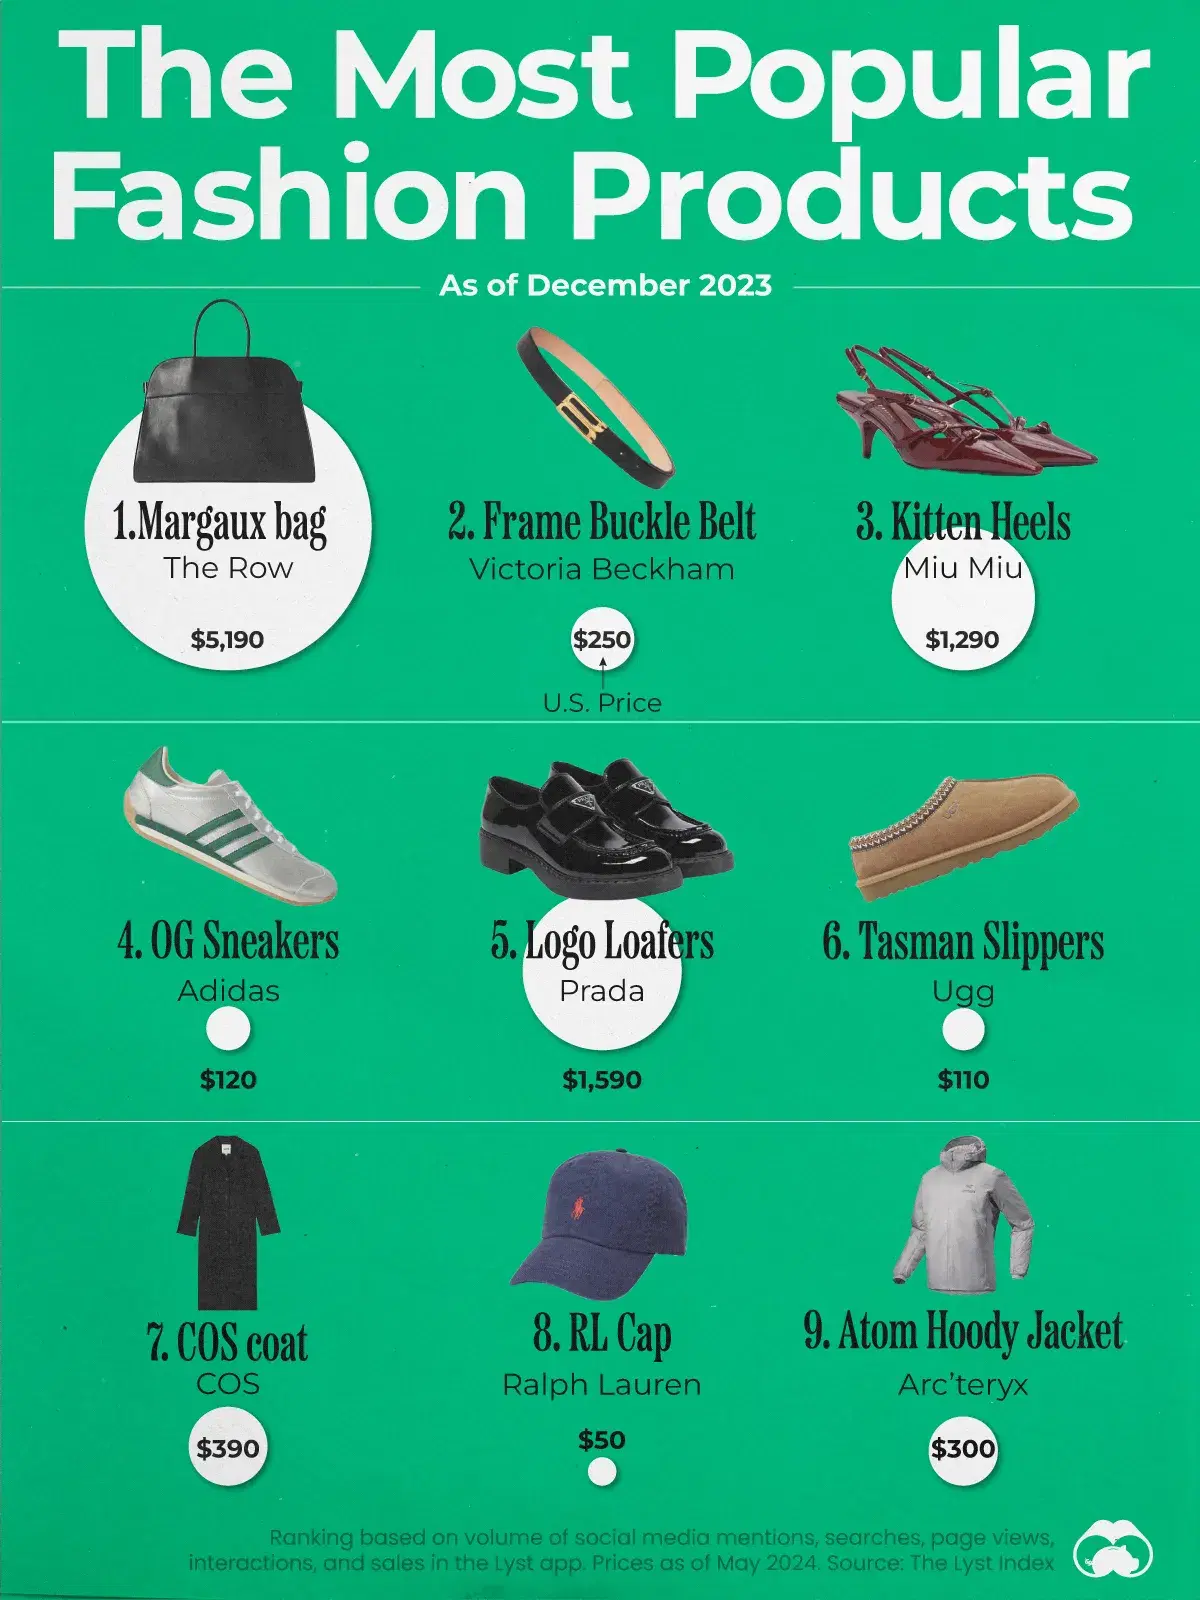 Lyst Index: Hottest Fashion Products (Q4 '23) 🔥